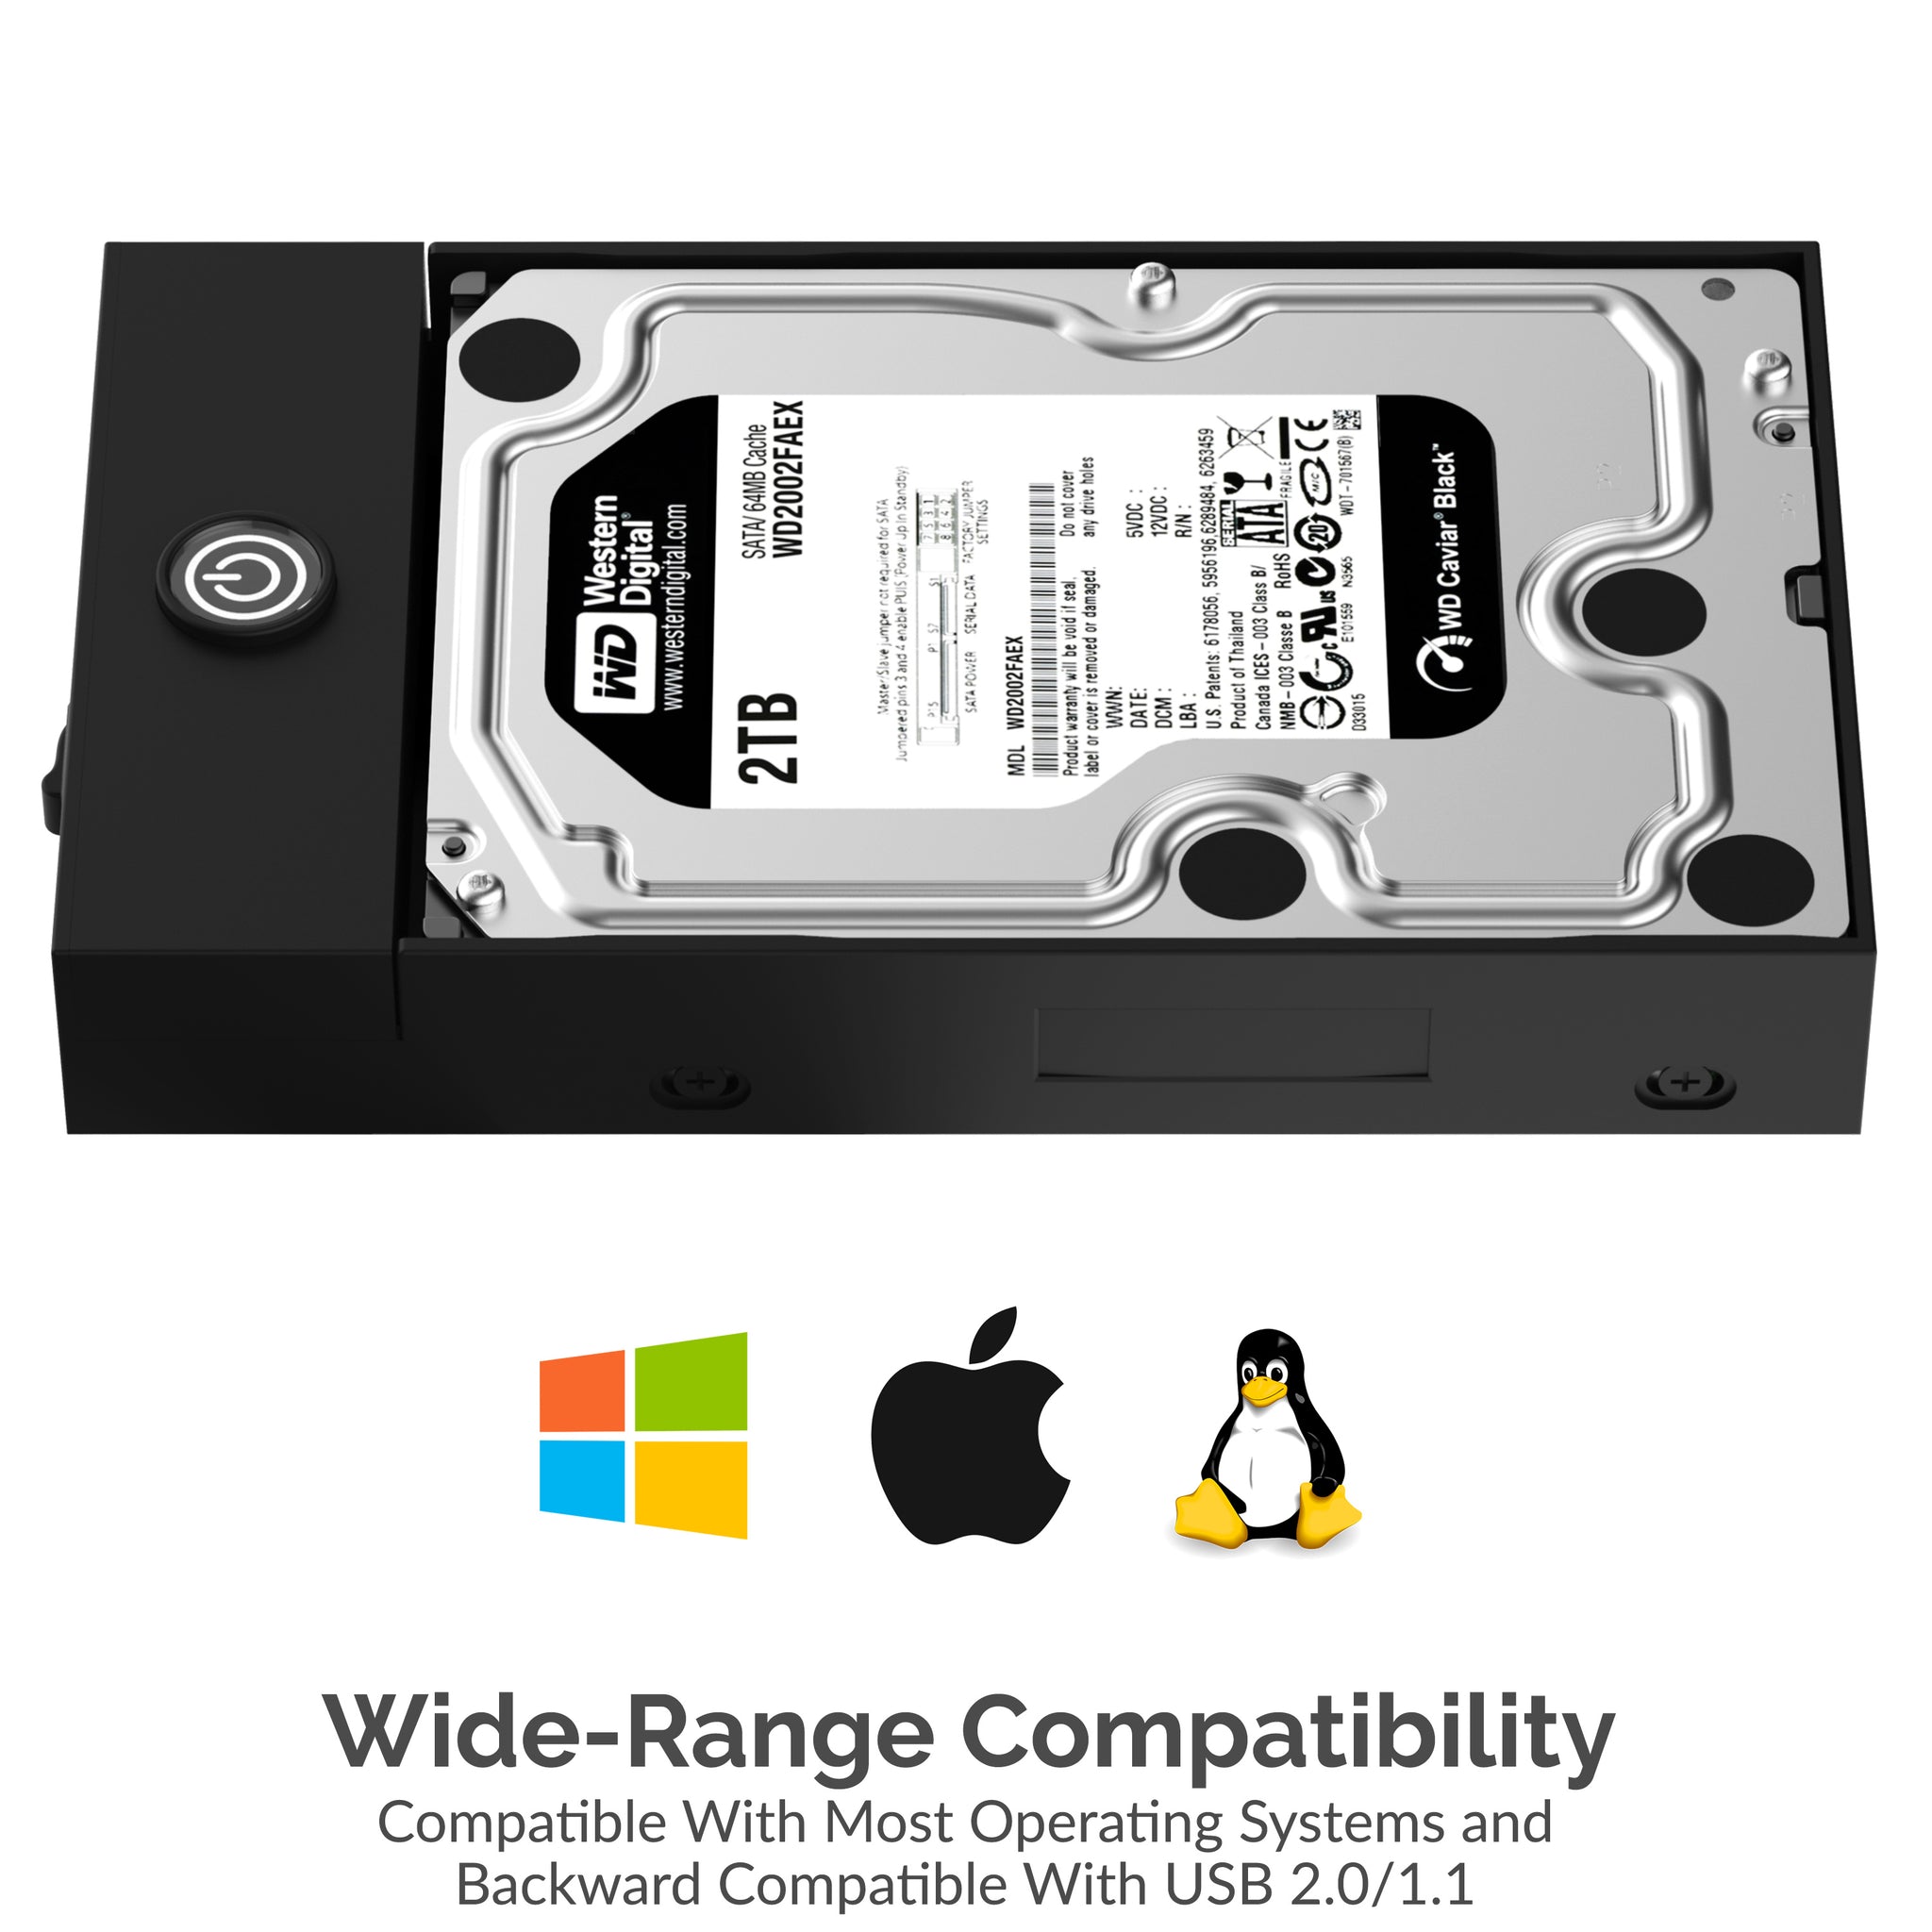 What Is a Hard Drive Enclosure? What Does a Hard Drive Enclosure Do?